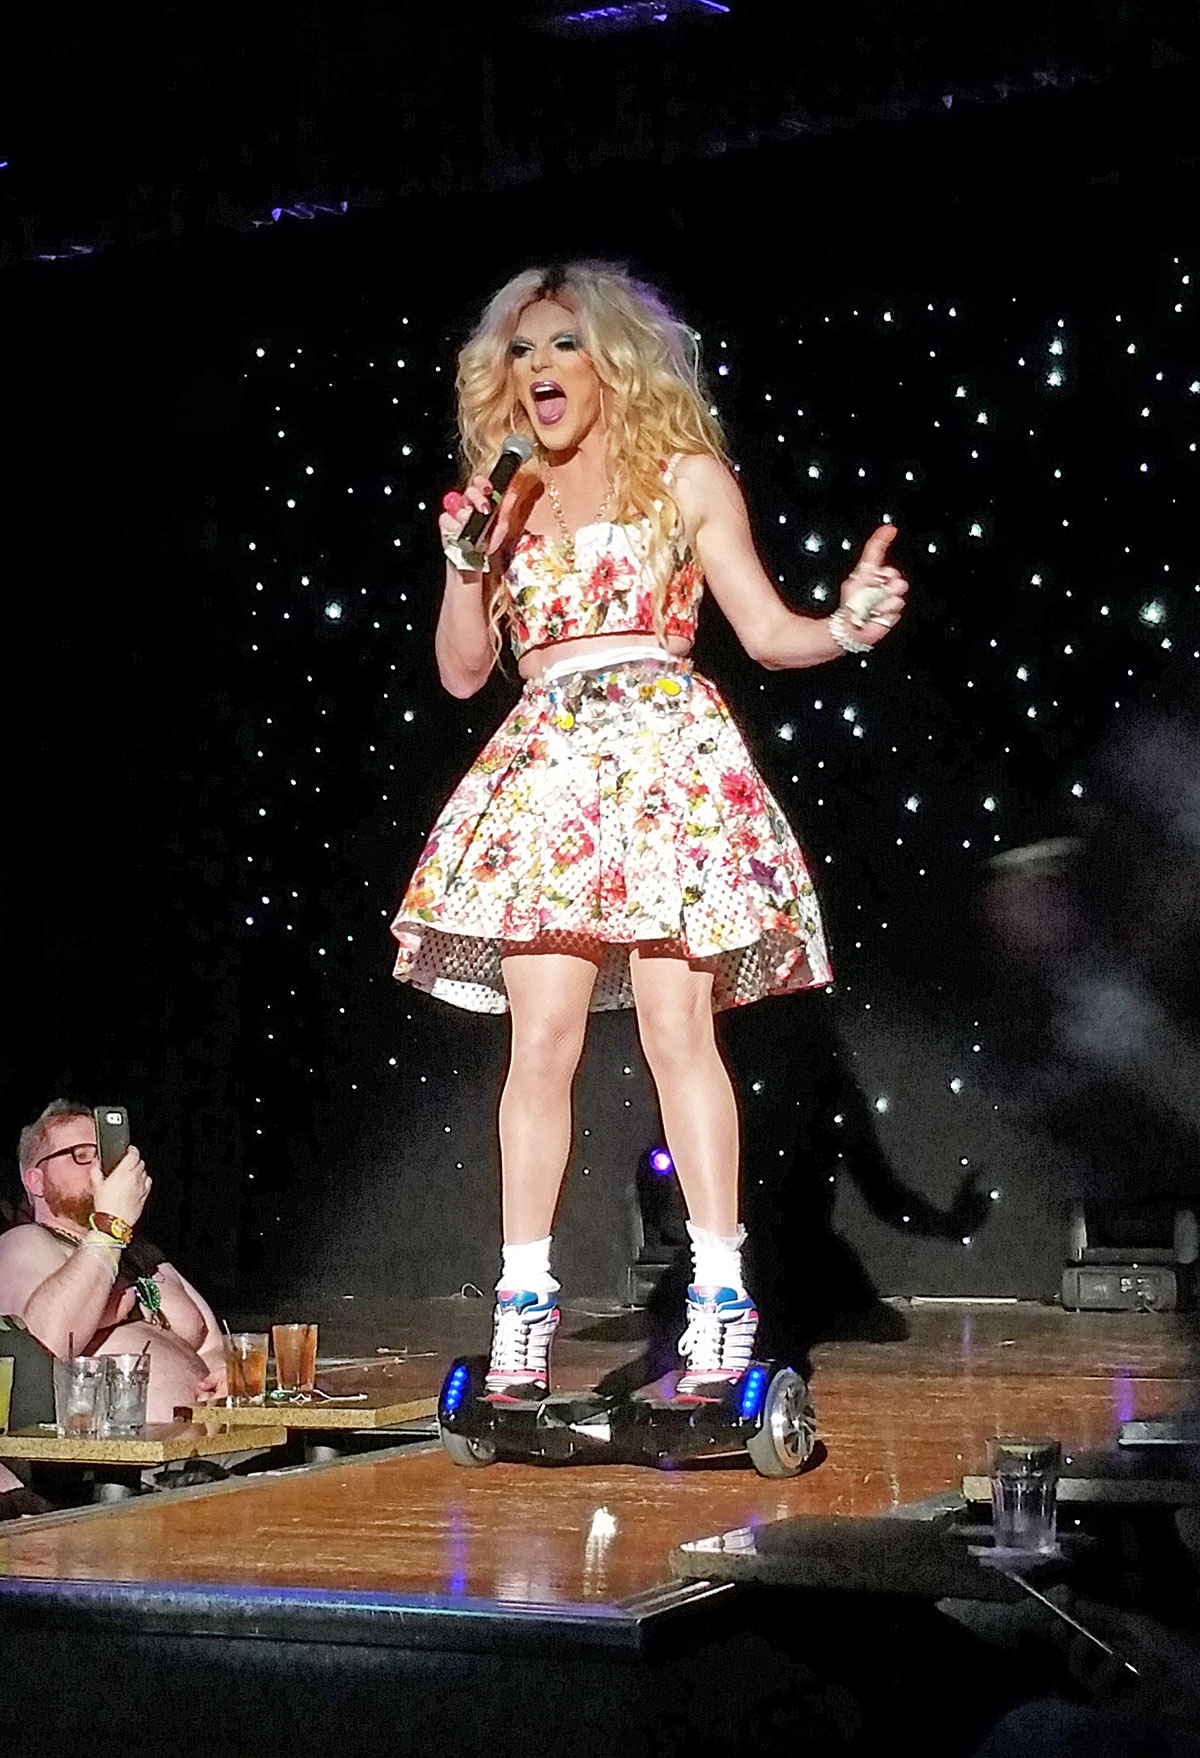 Willam performing on a hover board.